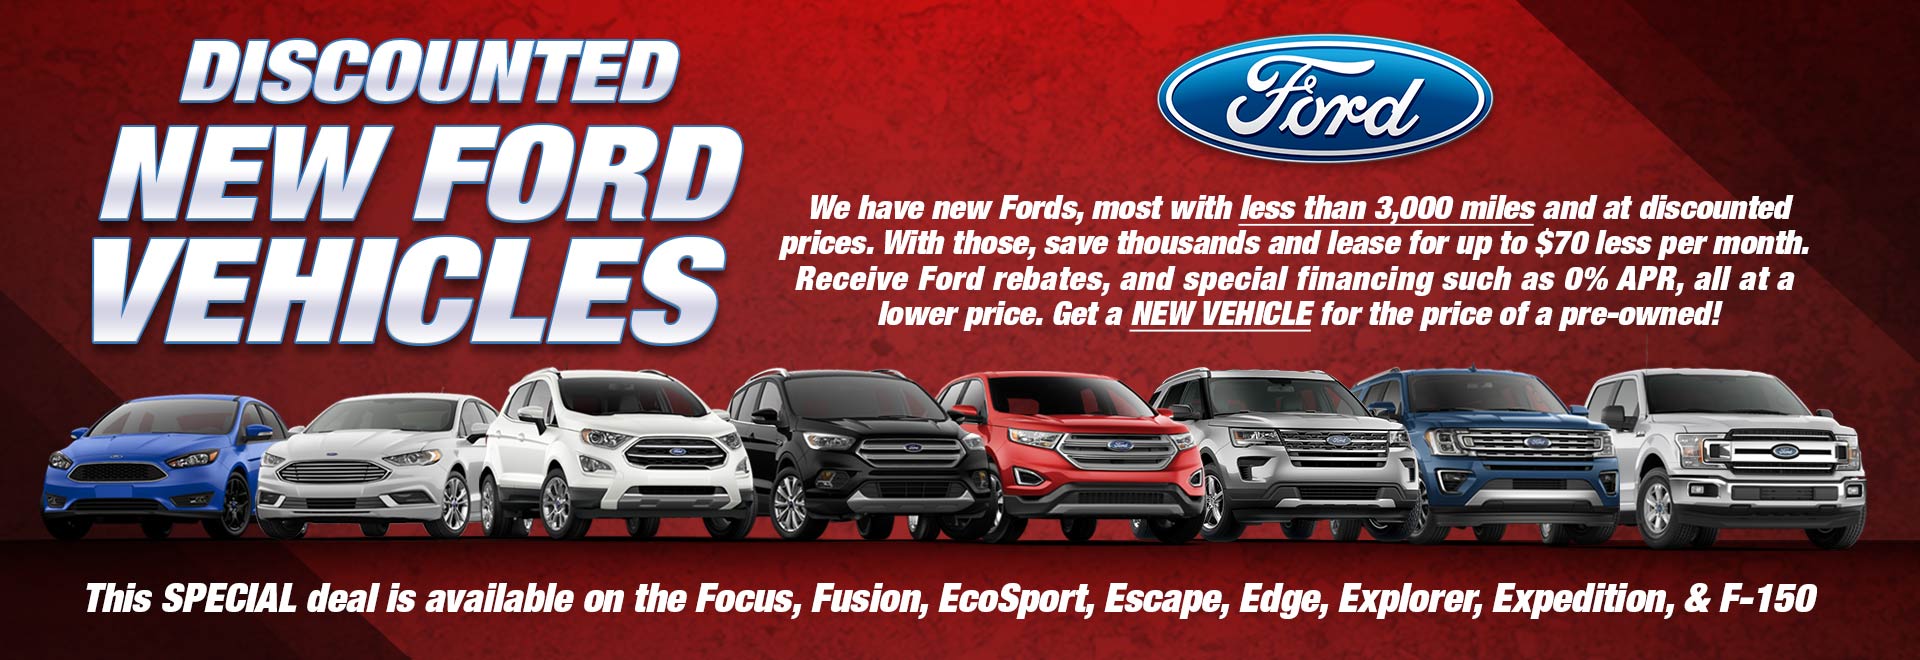 Discounted New Fords